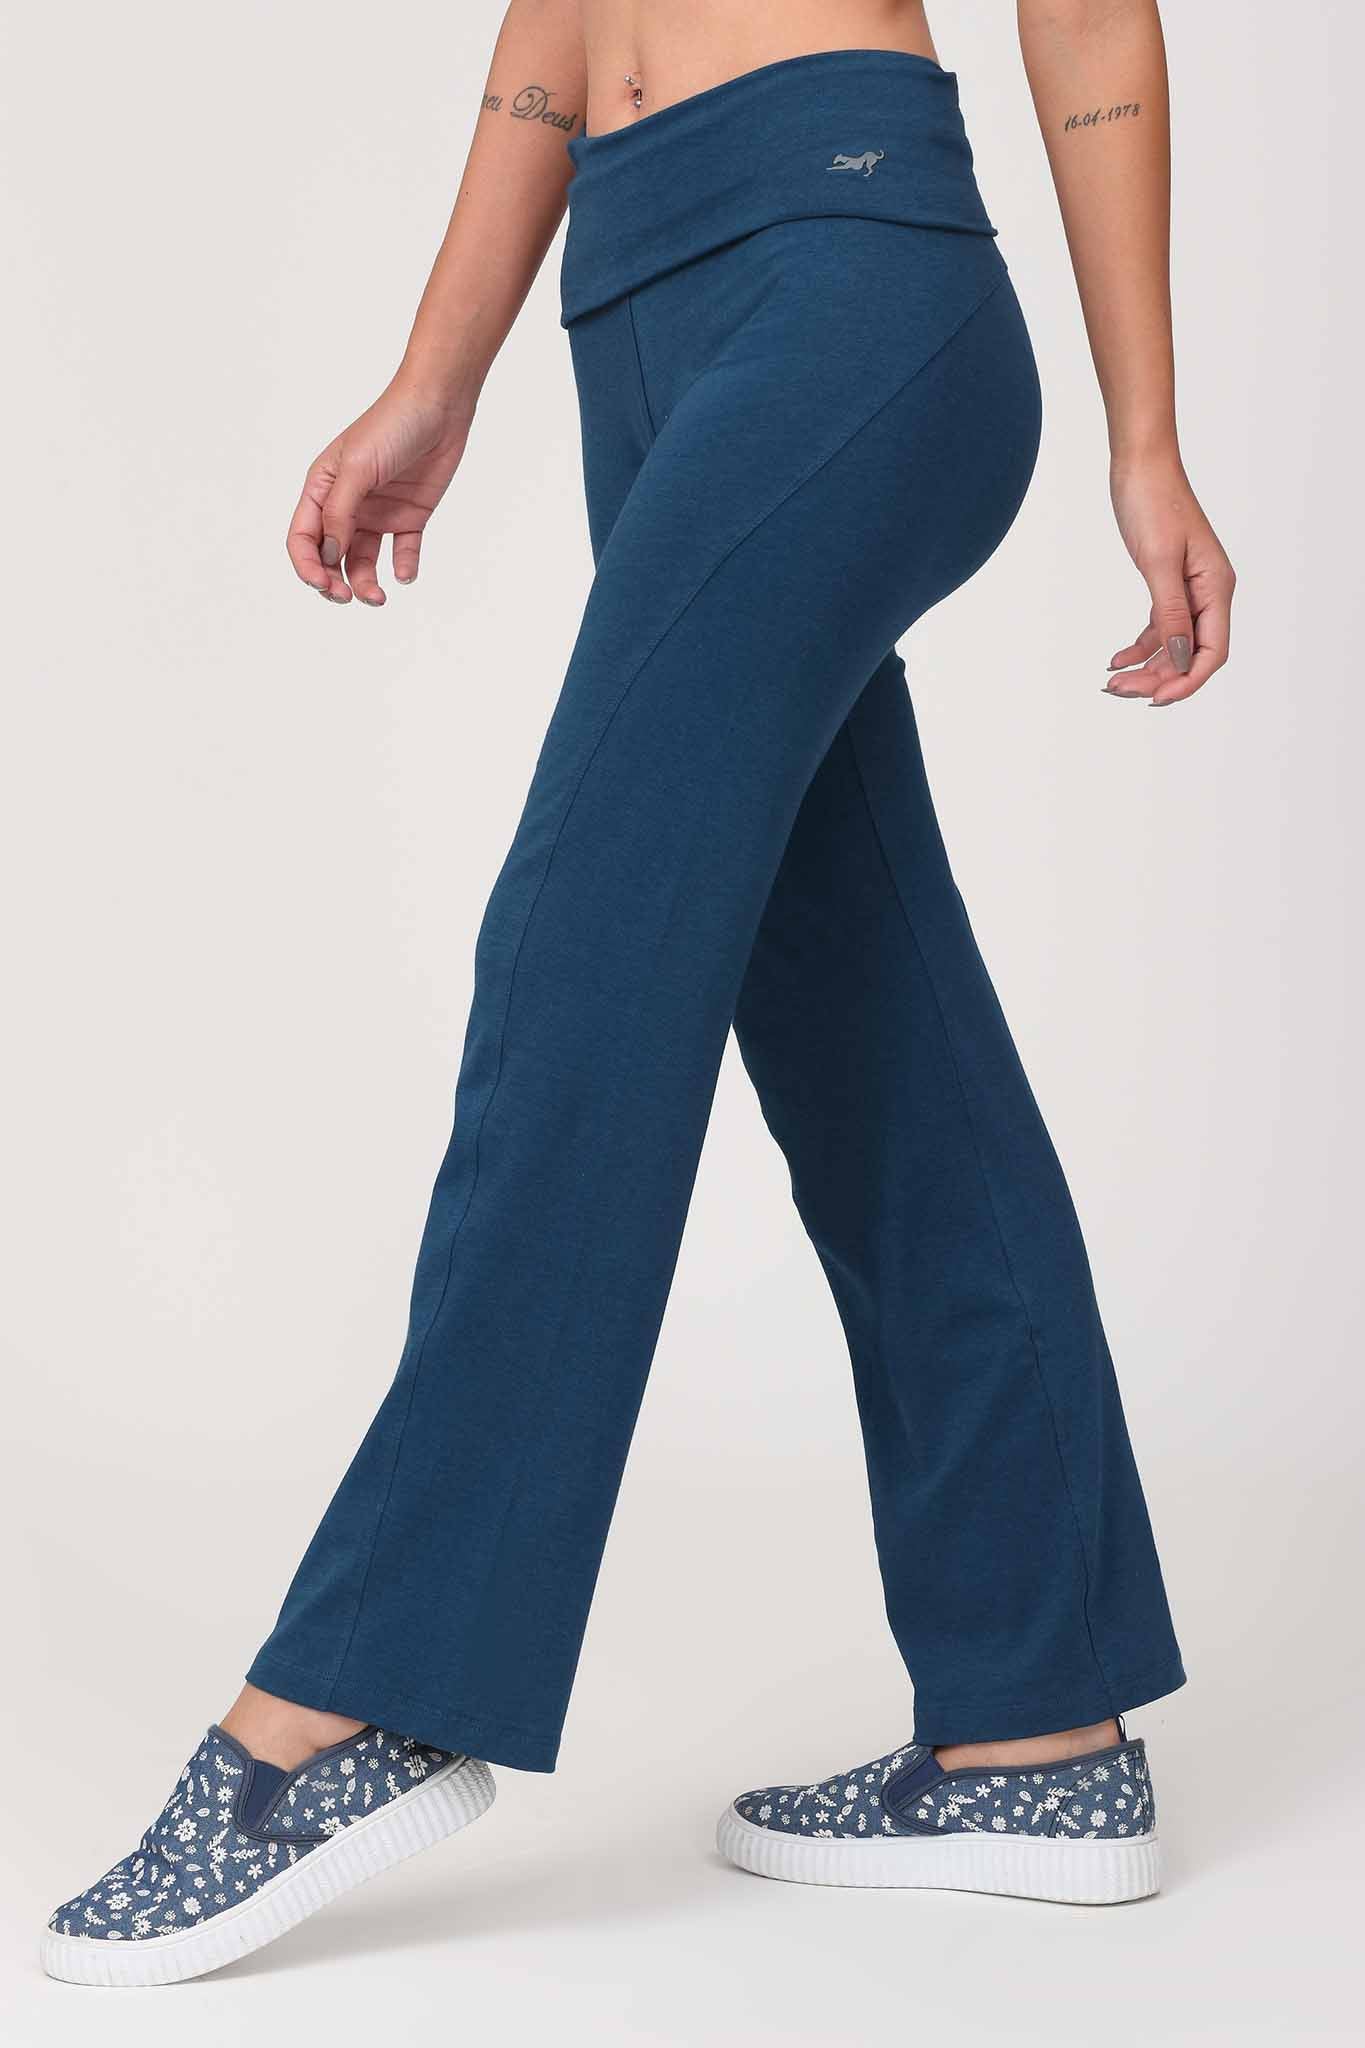 High Waist Maternity Pants in Organic Cotton Mix [CL1220N] - £20.00